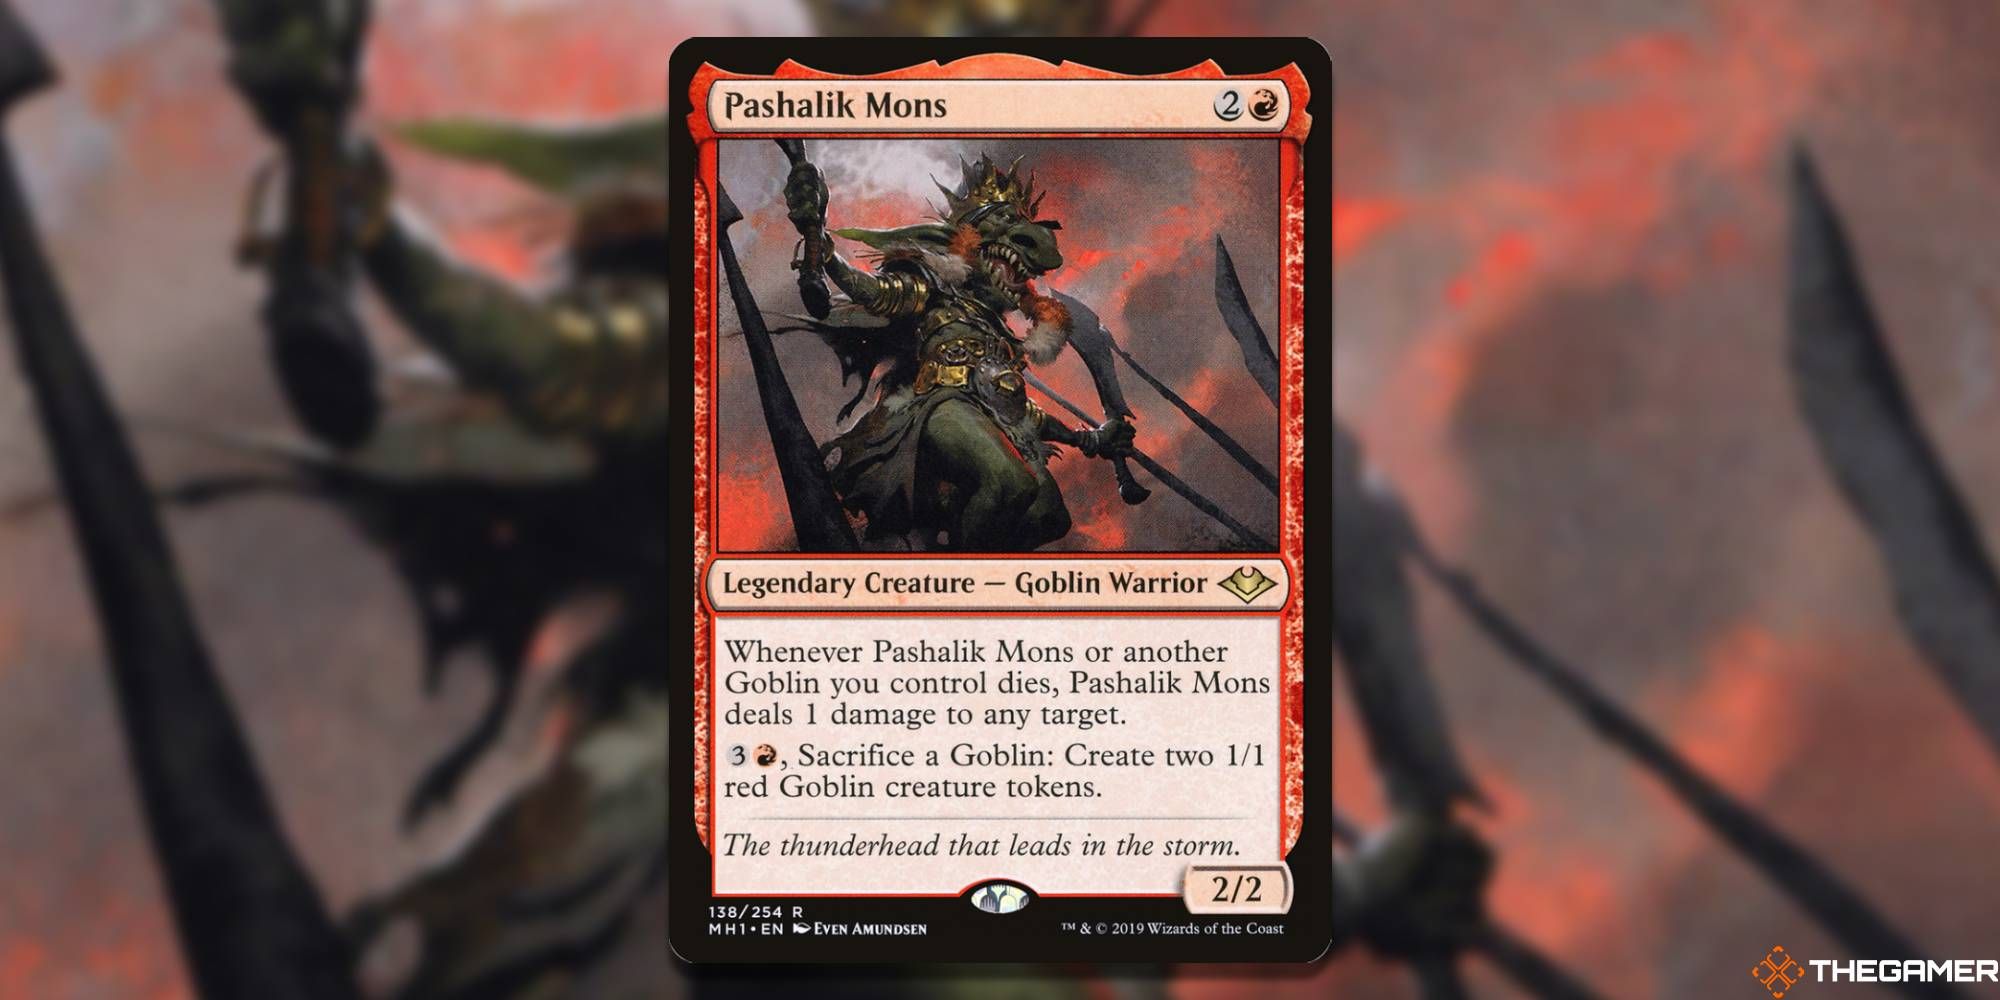 Image of the Pashalik Mons card in Magic: The Gathering, with art by Even Amundsen